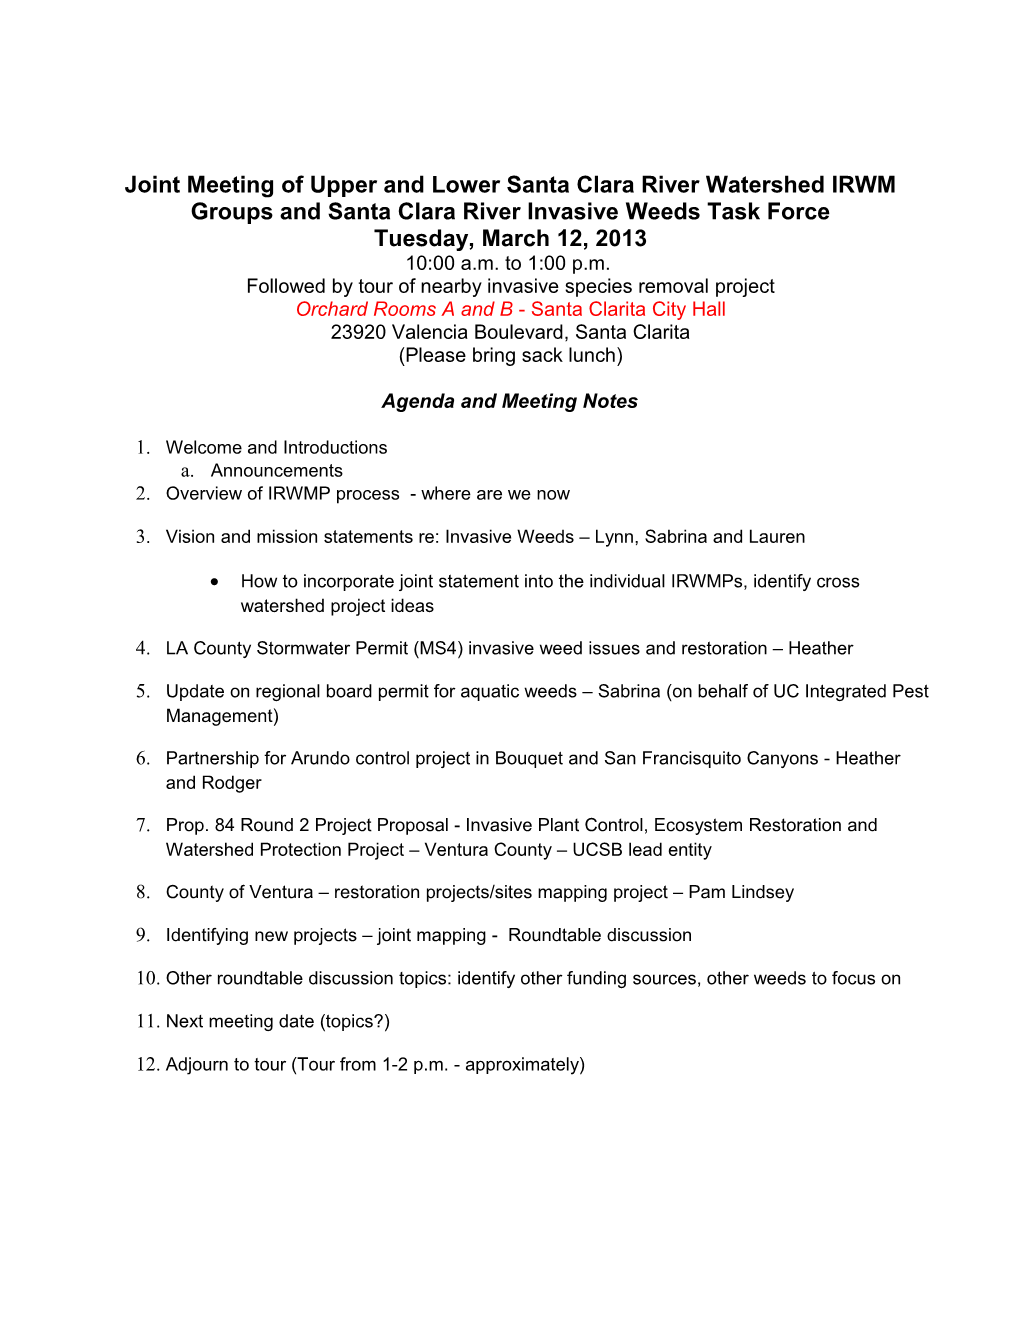 Joint Meeting of Upper and Lower Santa Clara River Watershed Groups